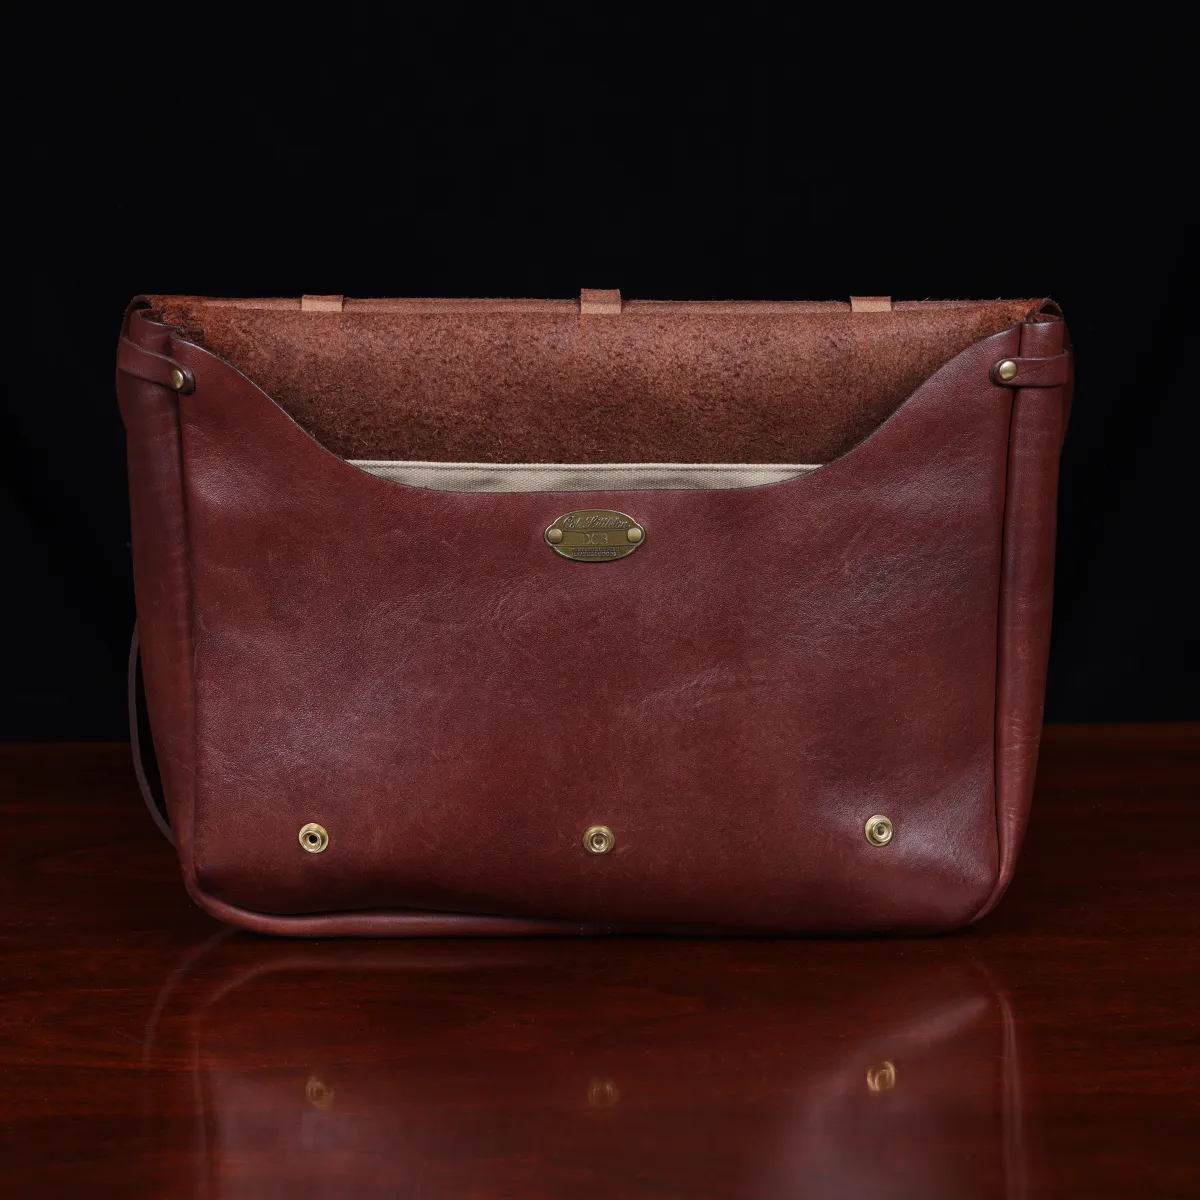 No. 1 Saddlebag Briefcase on a wooden table with a dark background - front open view